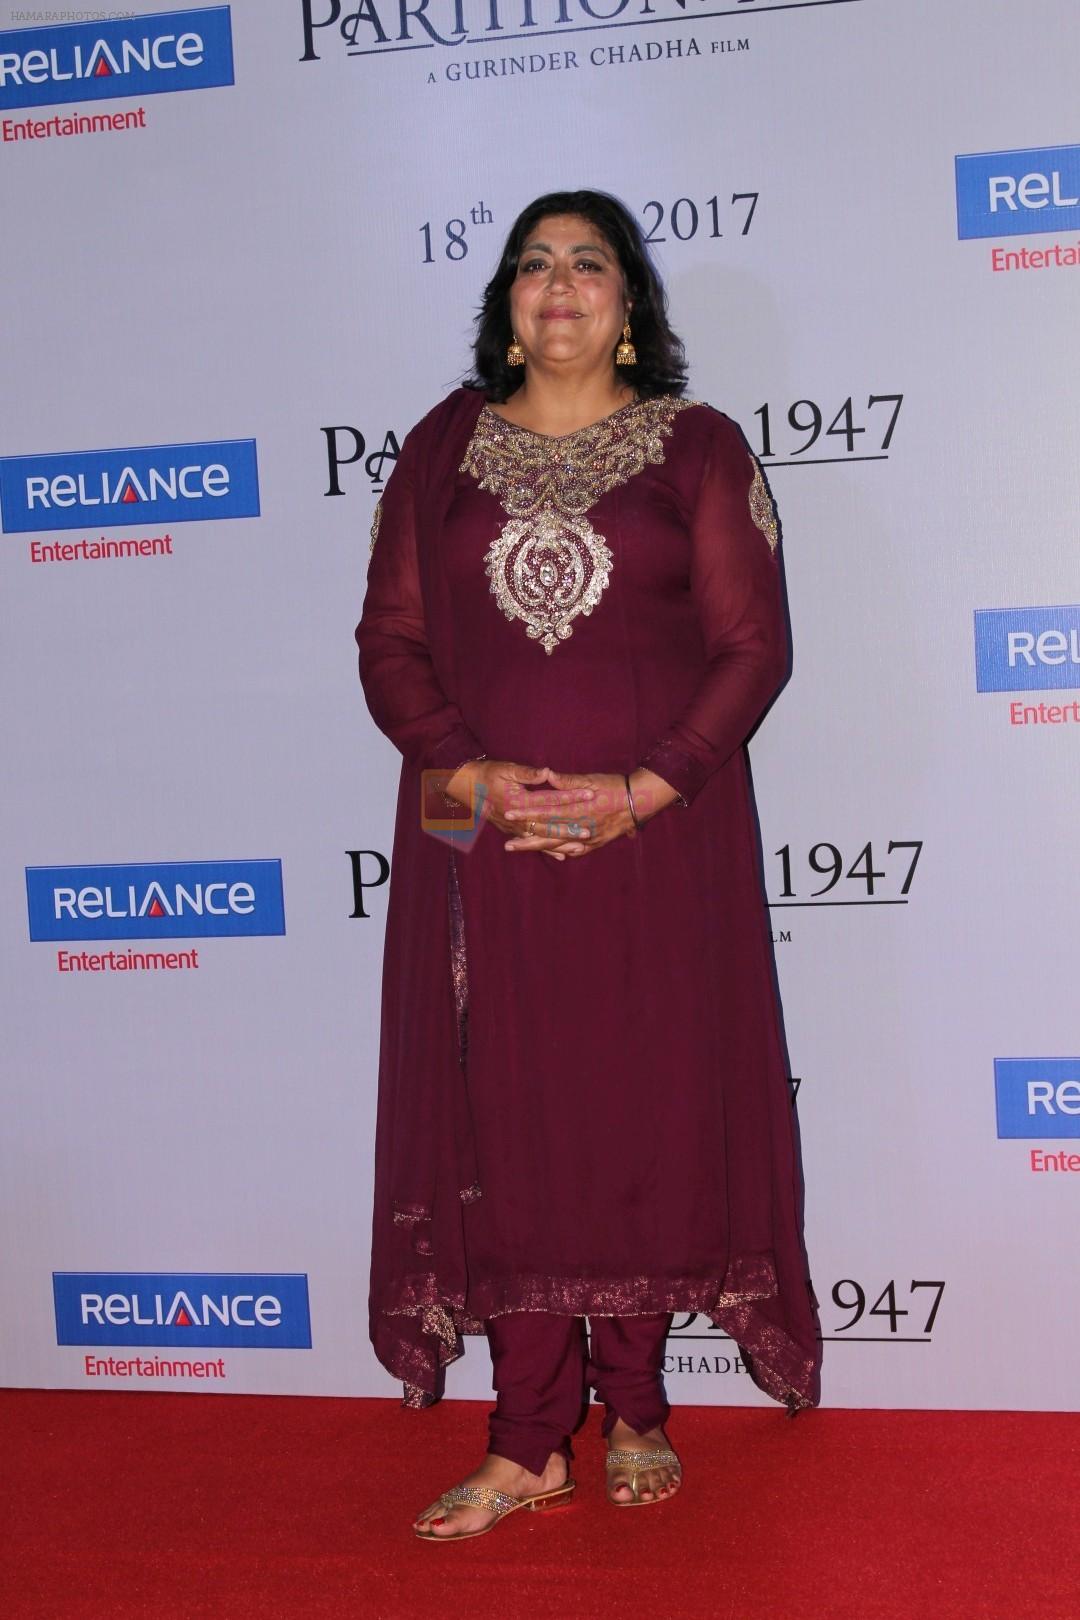 Gurinder Chadha At Trailer Launch Of Partition 1947 on 29th June 2017